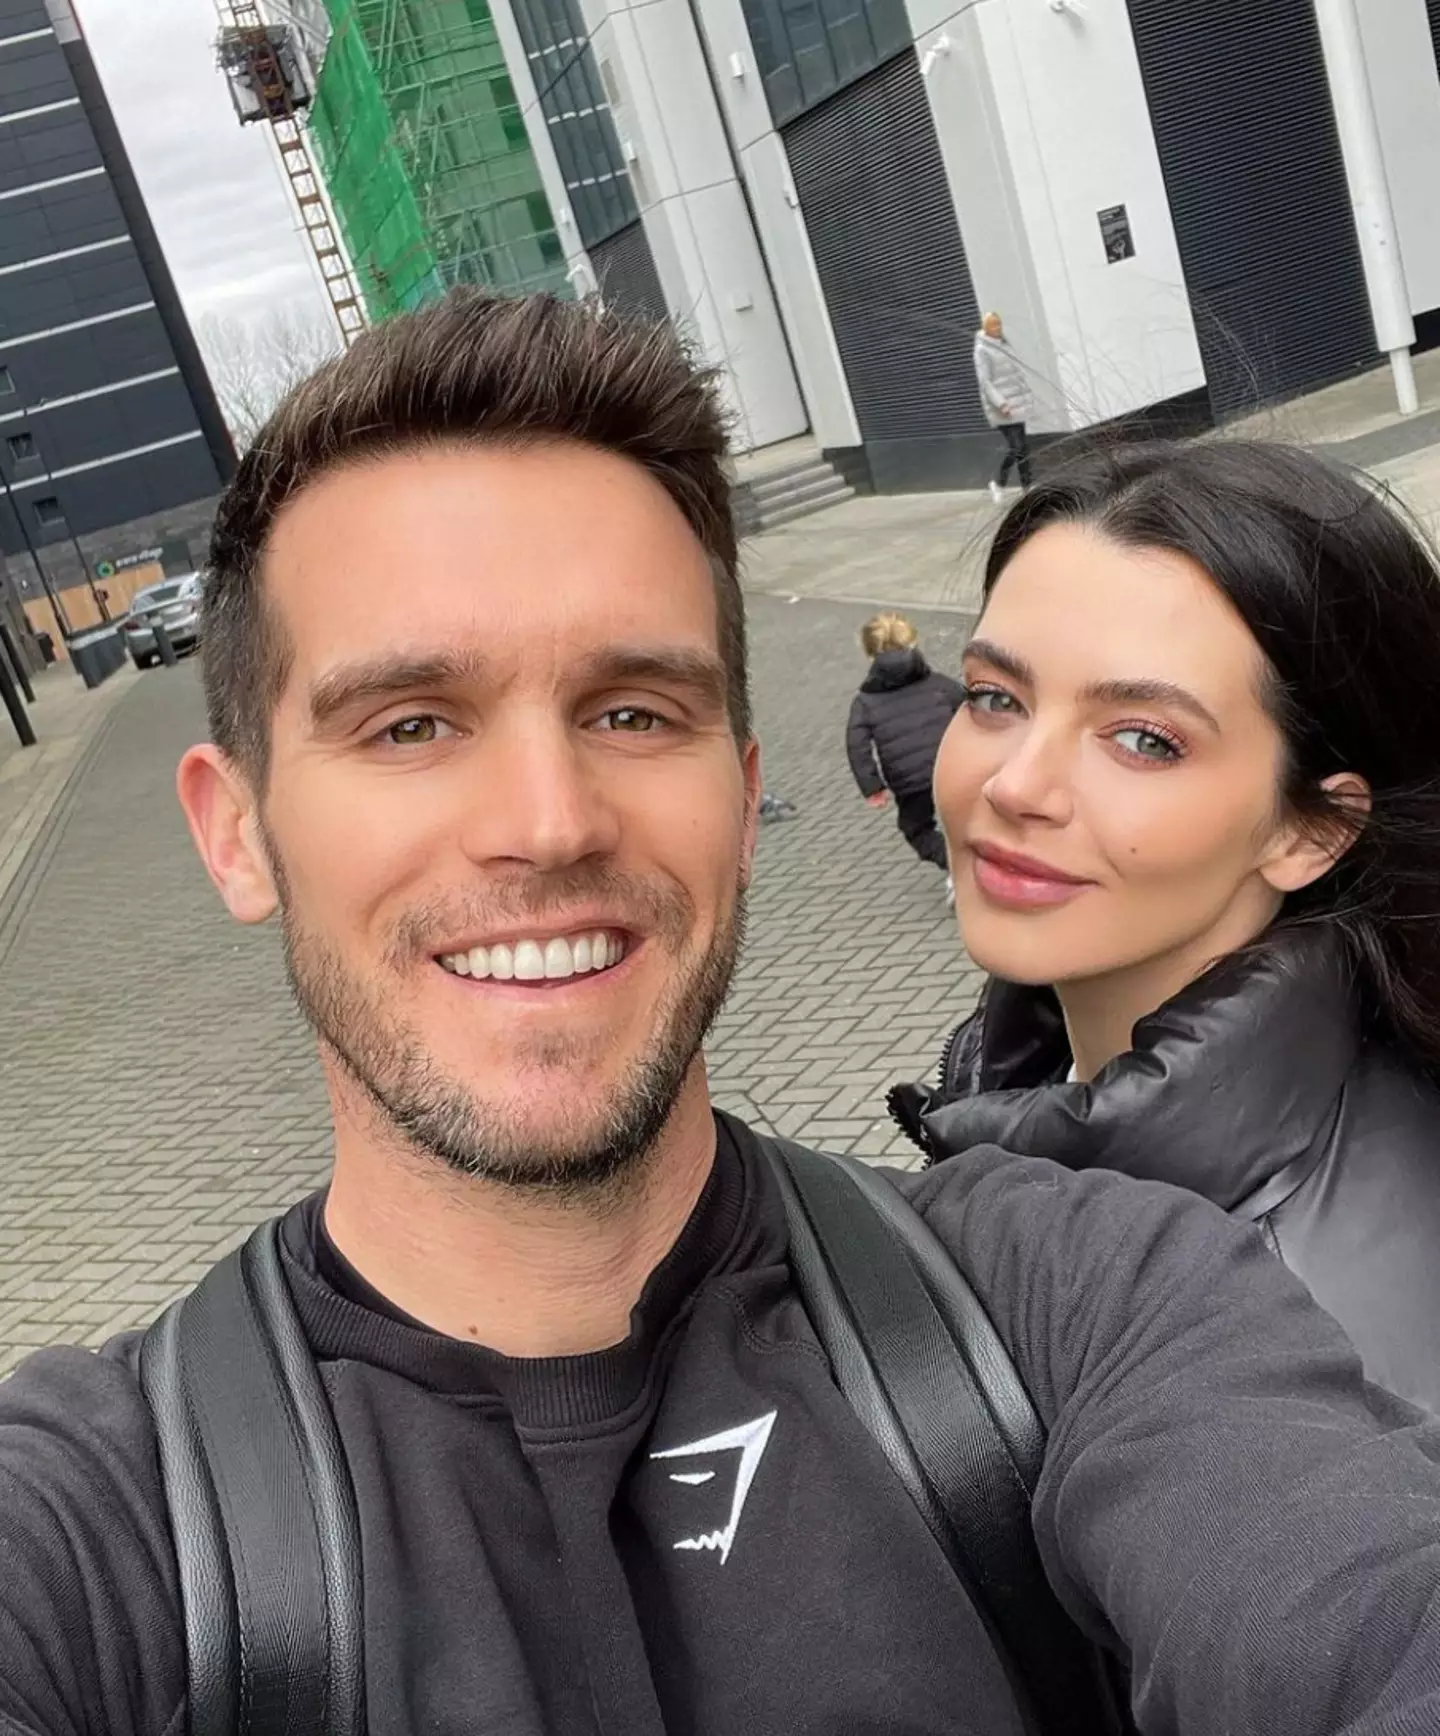 Geordie Shore star Gaz Beadle and wife Emma McVey have called it quits after two years of marriage.